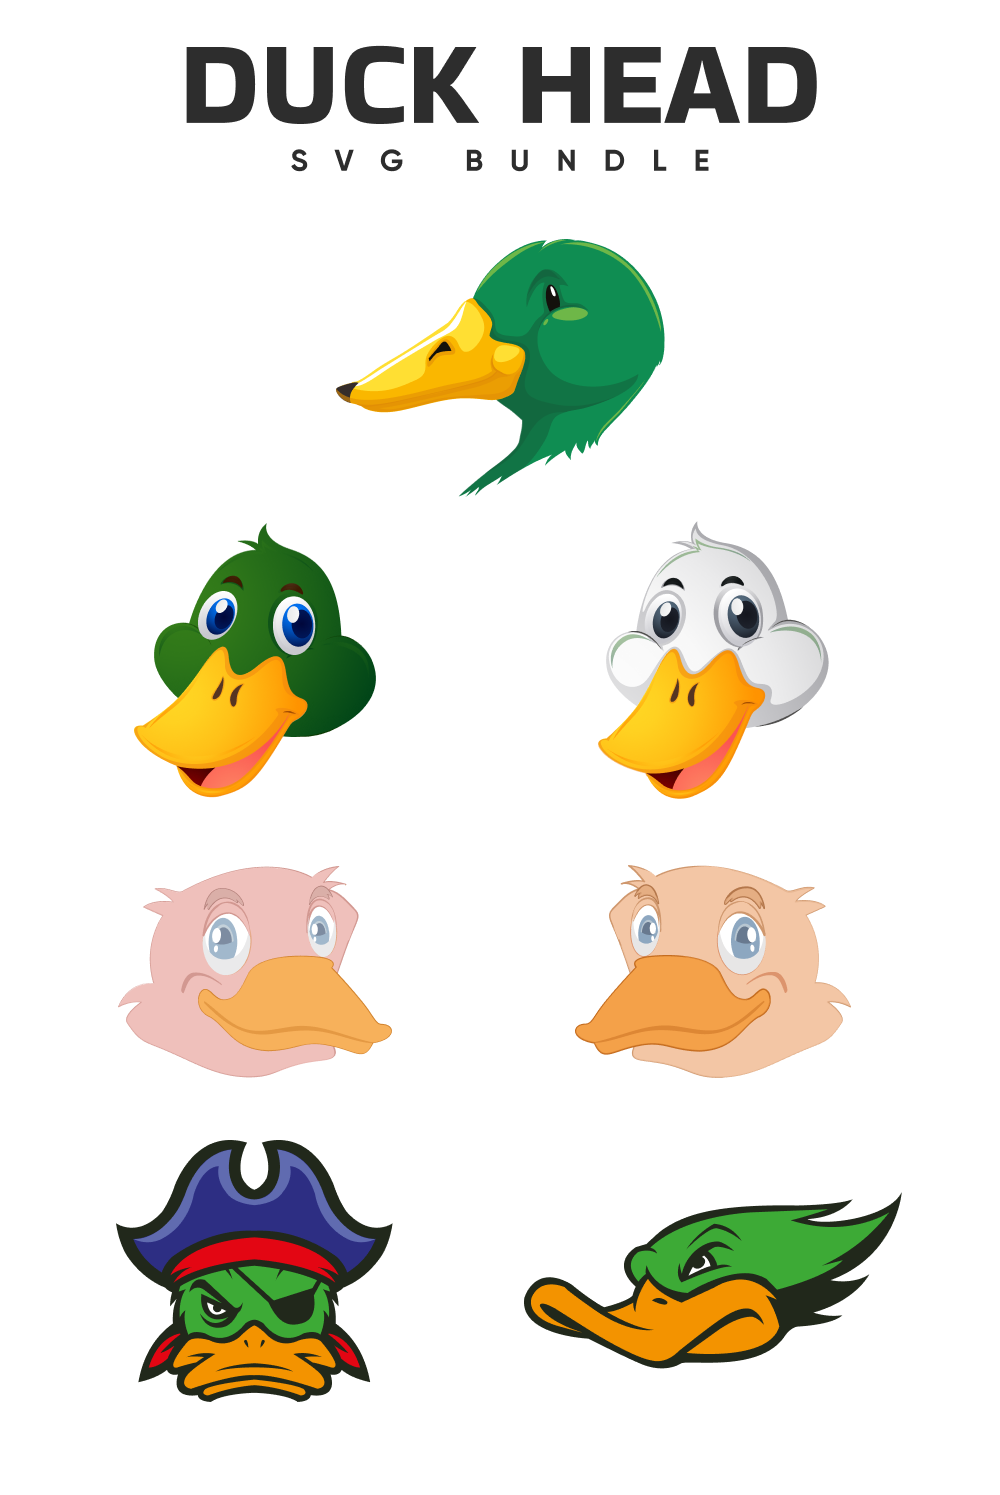 Bunch of ducks that are on a white background.